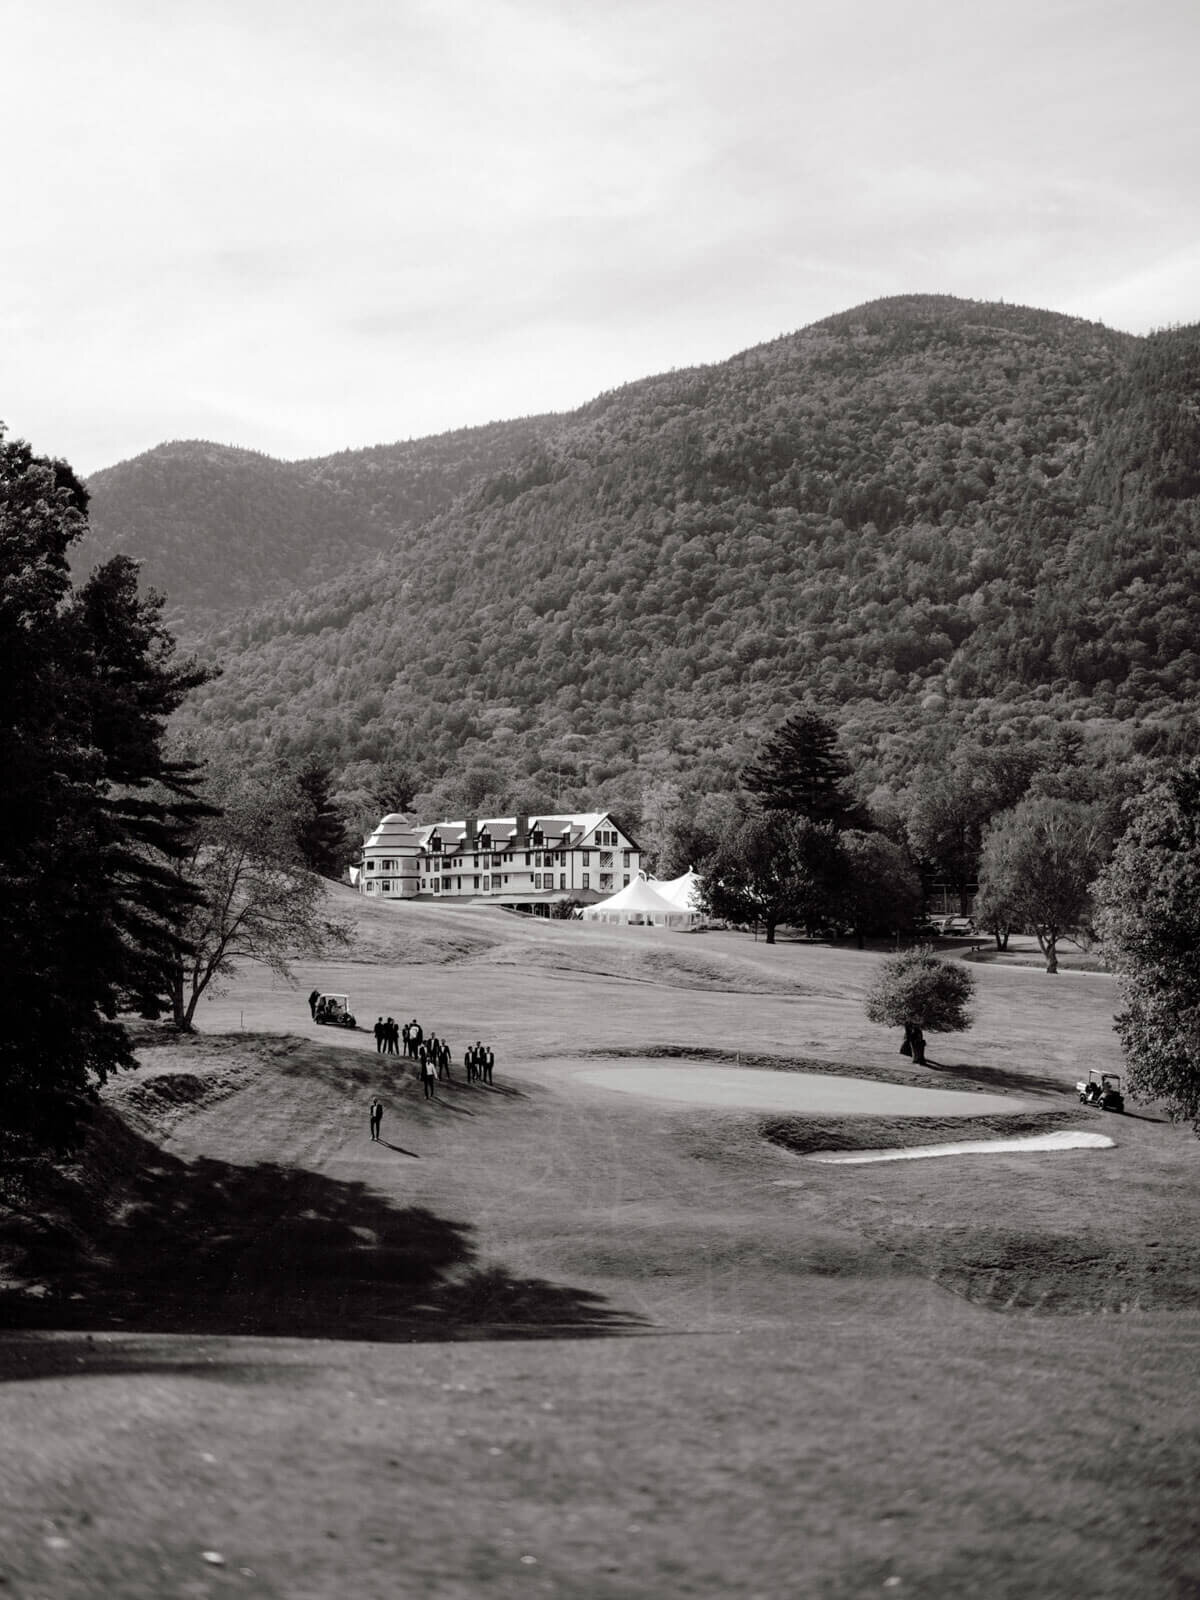 The Ausable Club's golf course, hotel, and the Adirondack Mountains in New York. Image by Jenny Fu Studio.